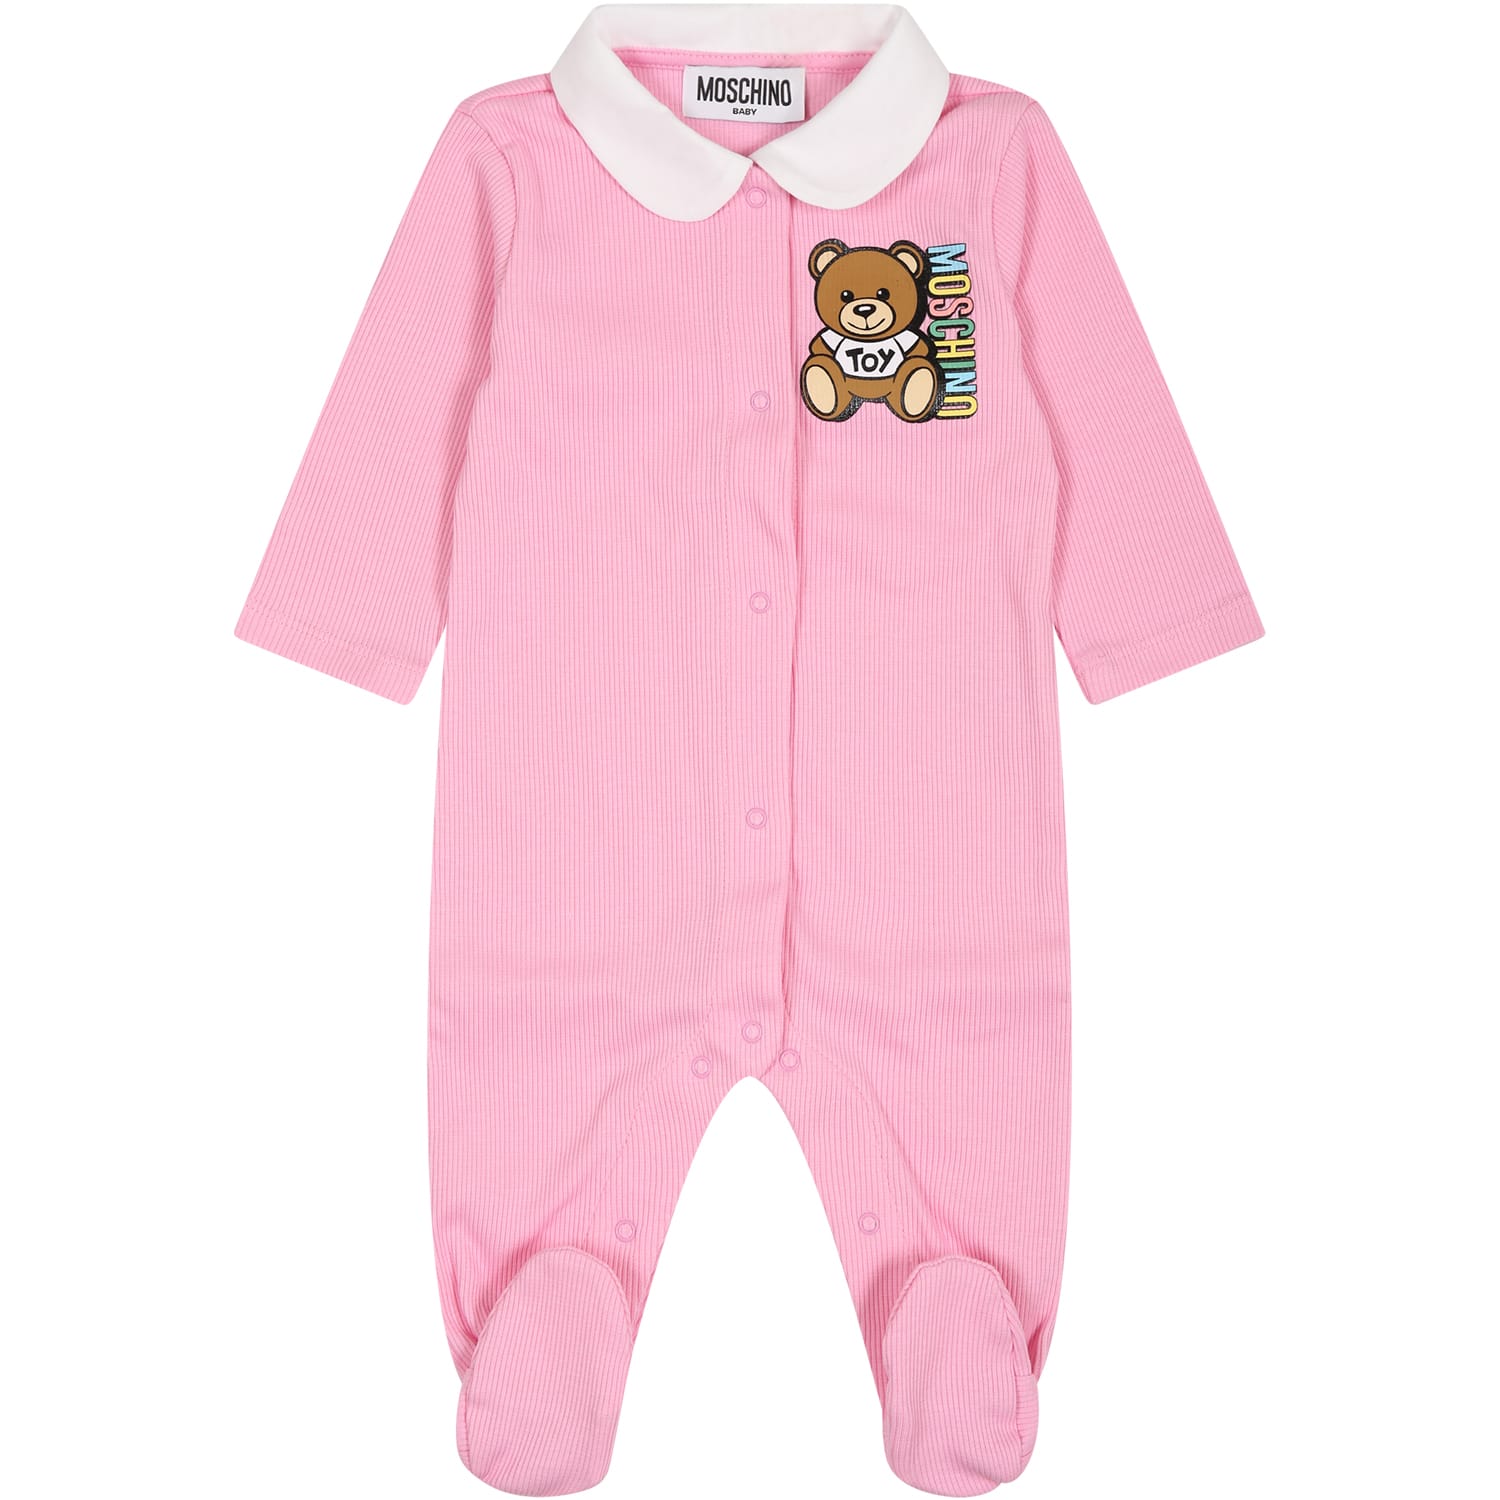 MOSCHINO PINK BABYGROW FOR BABY GIRL WITH TEDDY BEAR AND LOGO